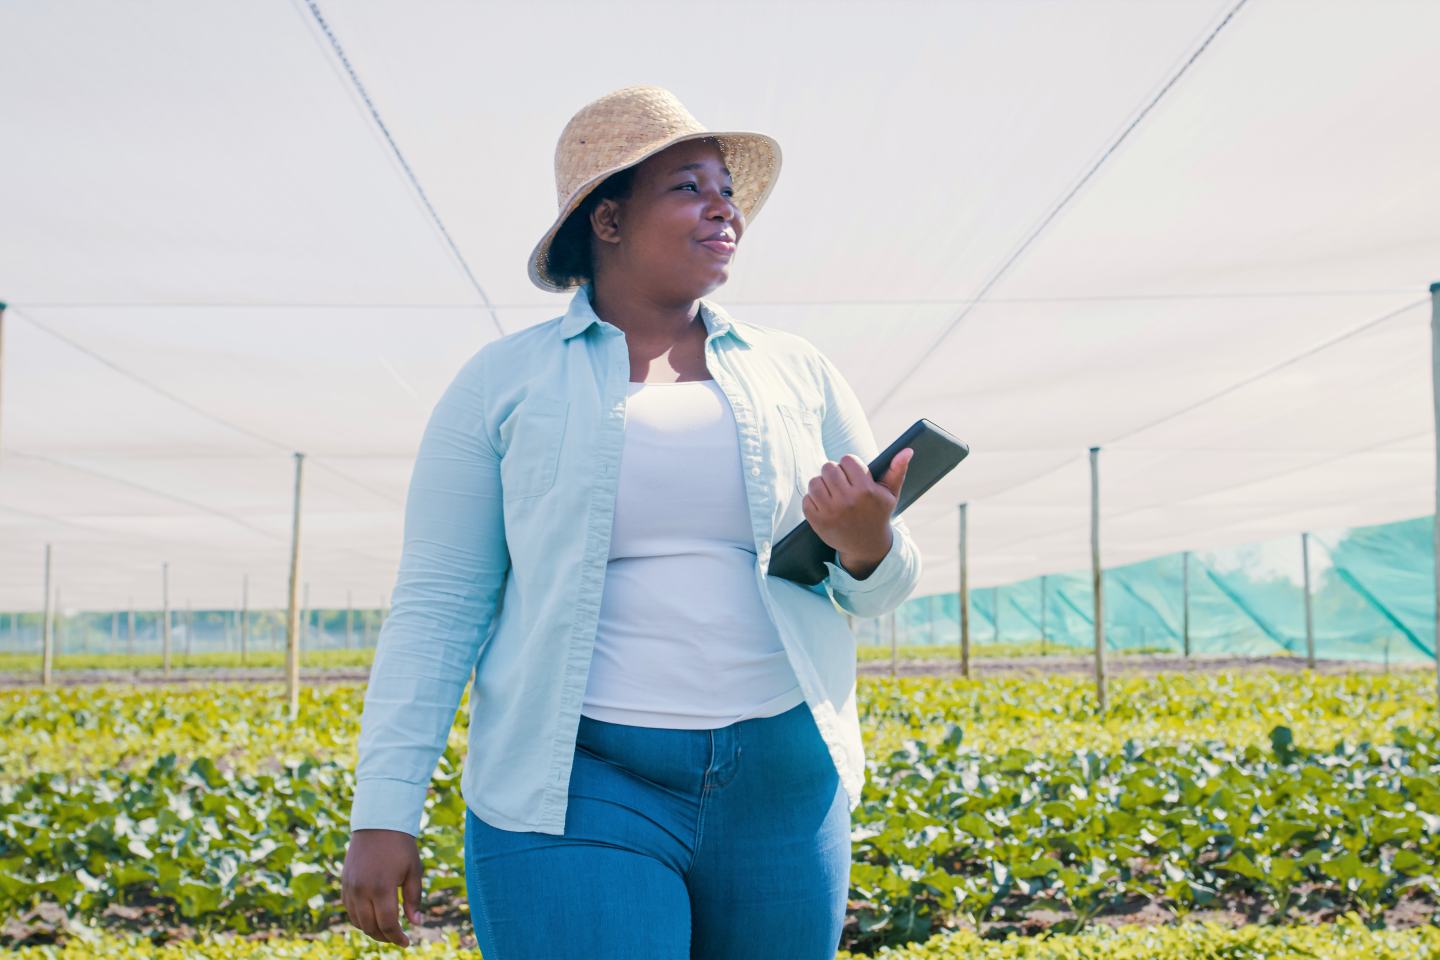 A Black woman stands in the foreground with a large vegetable crop growing under sunshades at her back. She is wearing jeans, a white shirt, and a straw hat. She is carrying a smart tablet under her arm, and is surveying the distance. 